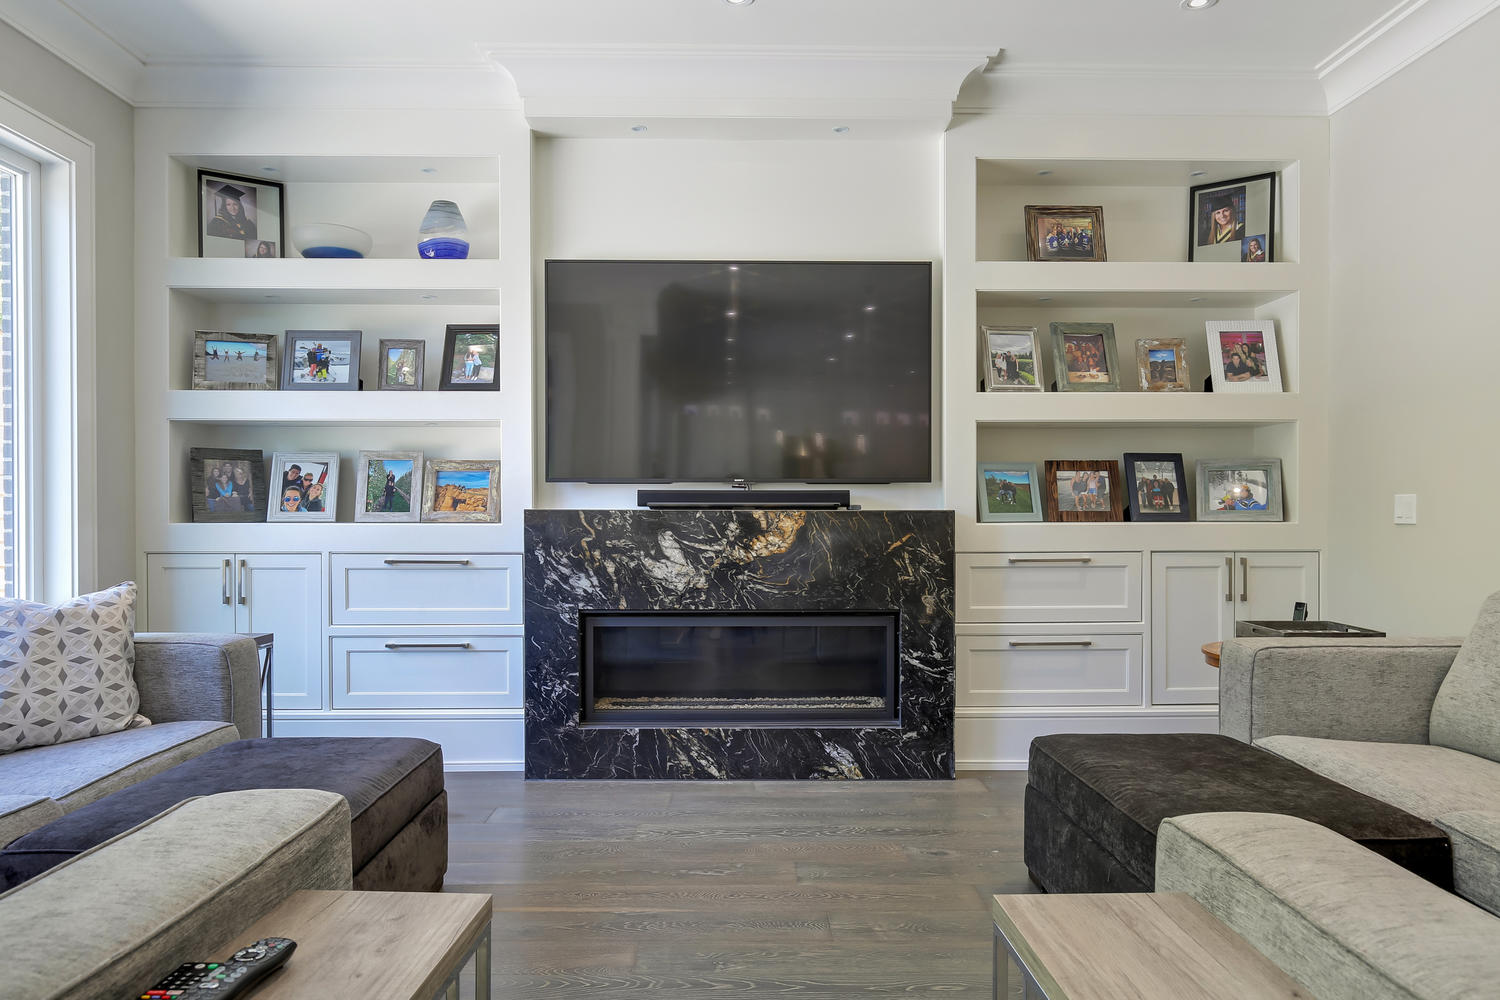 view of a fireplace and a LED TV above it